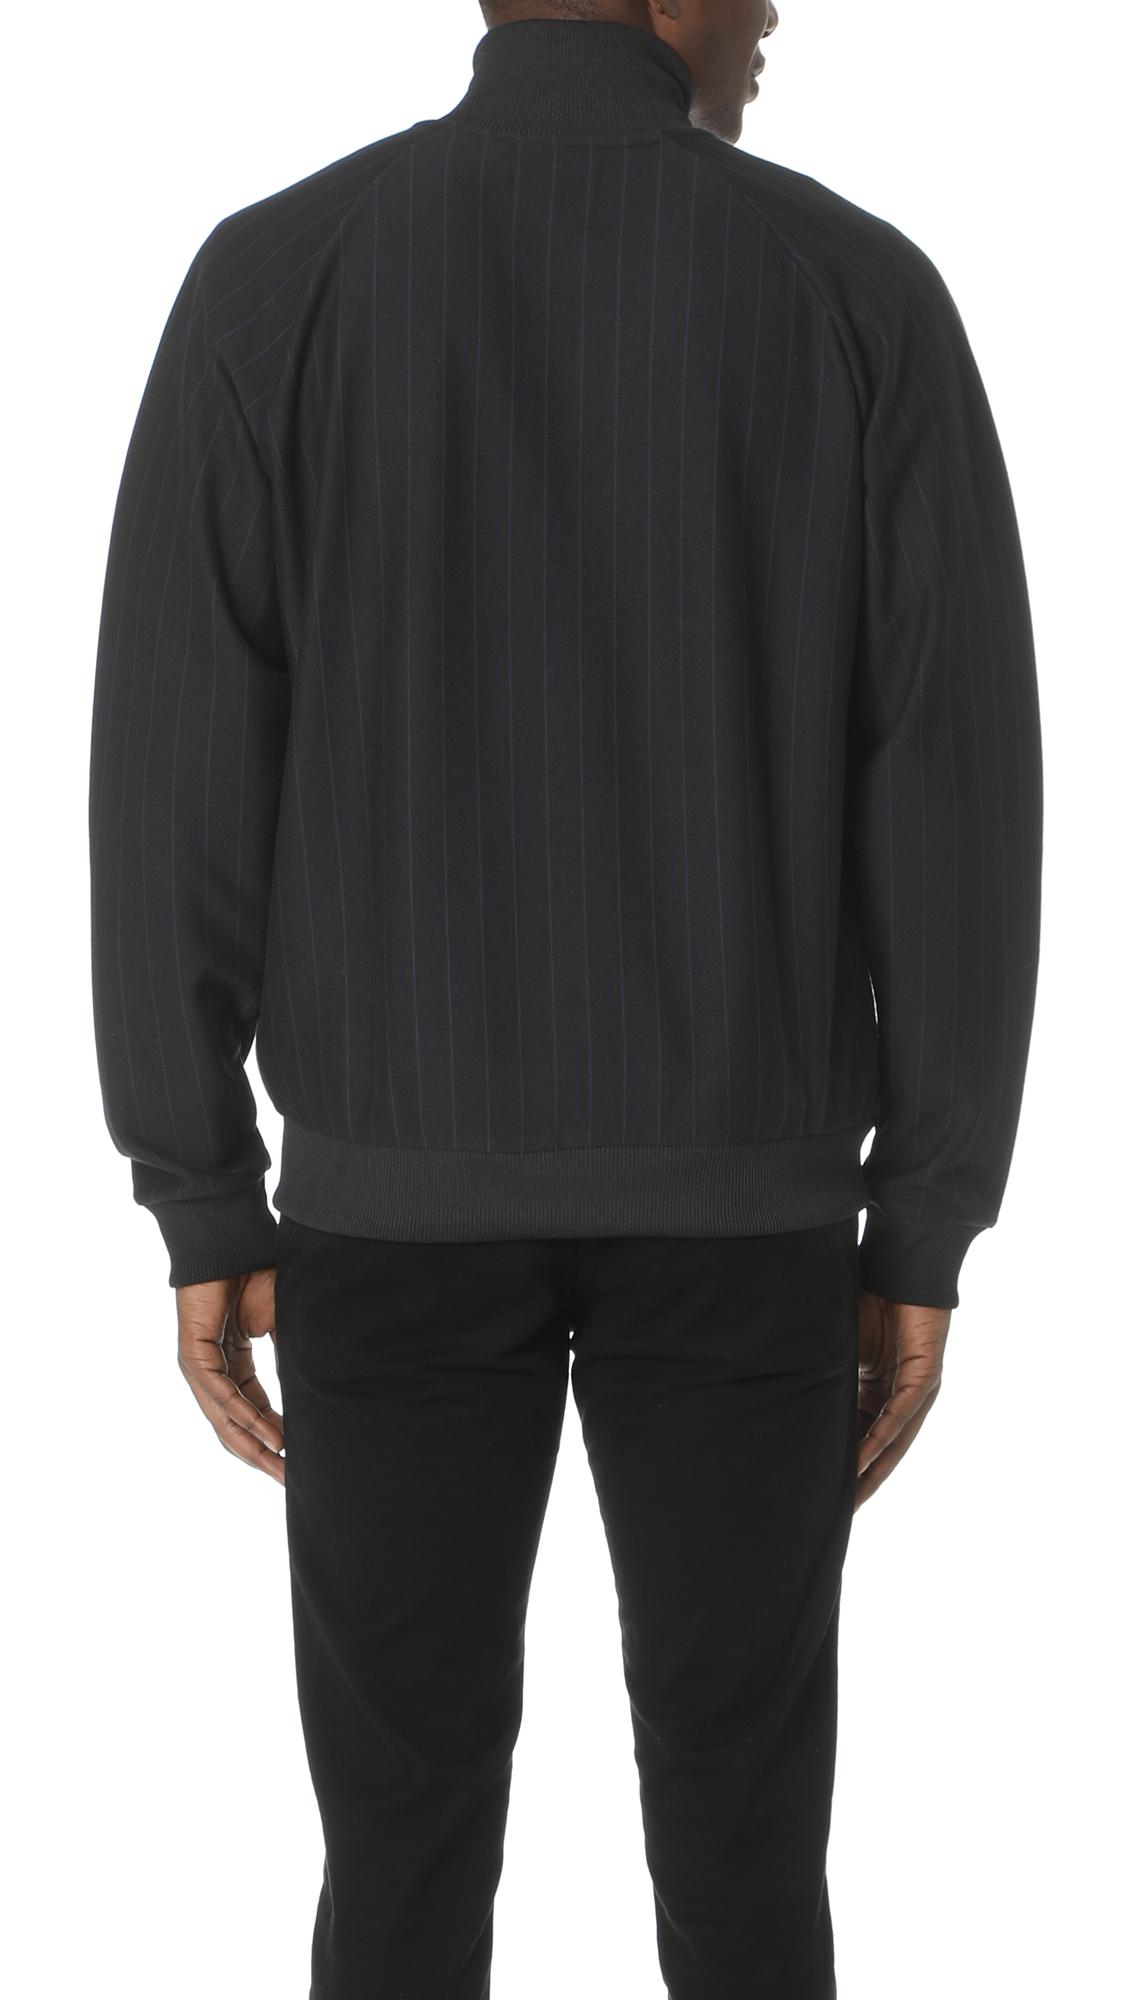 Fred Perry Synthetic Pinstripe Track Jacket in Black for Men - Lyst